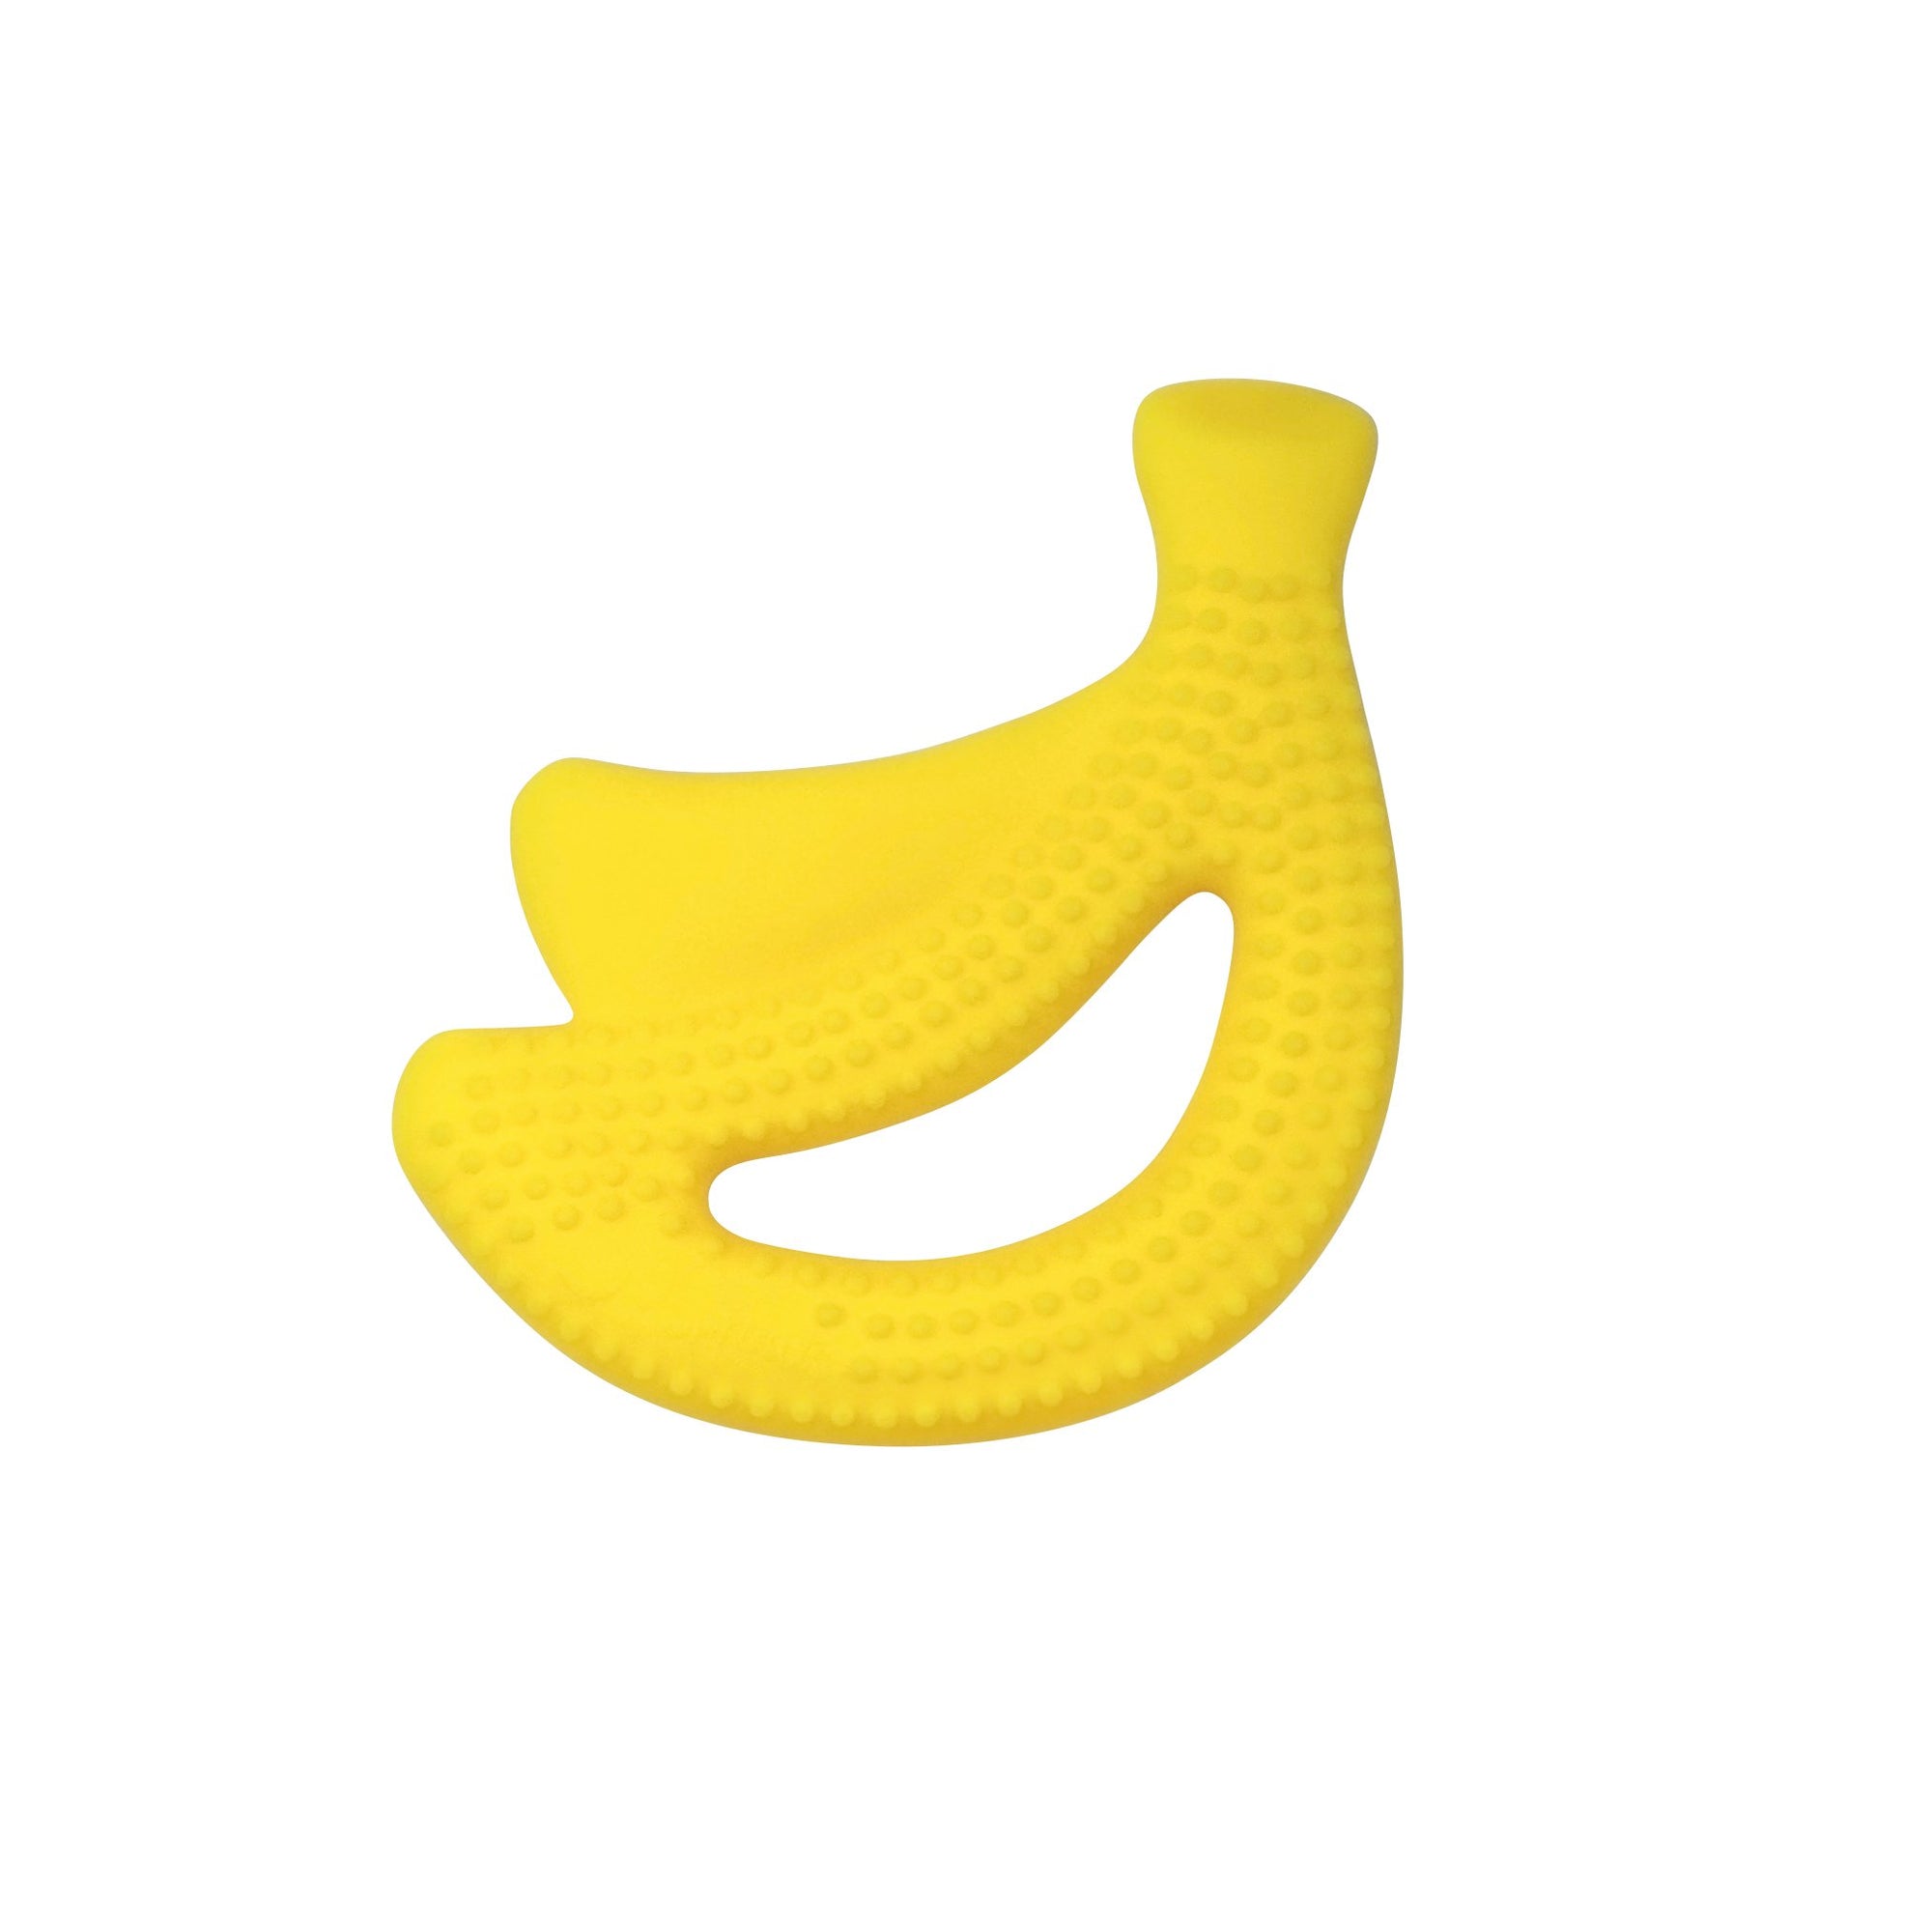 Yellow Banana Fruit Teether made from Silicone